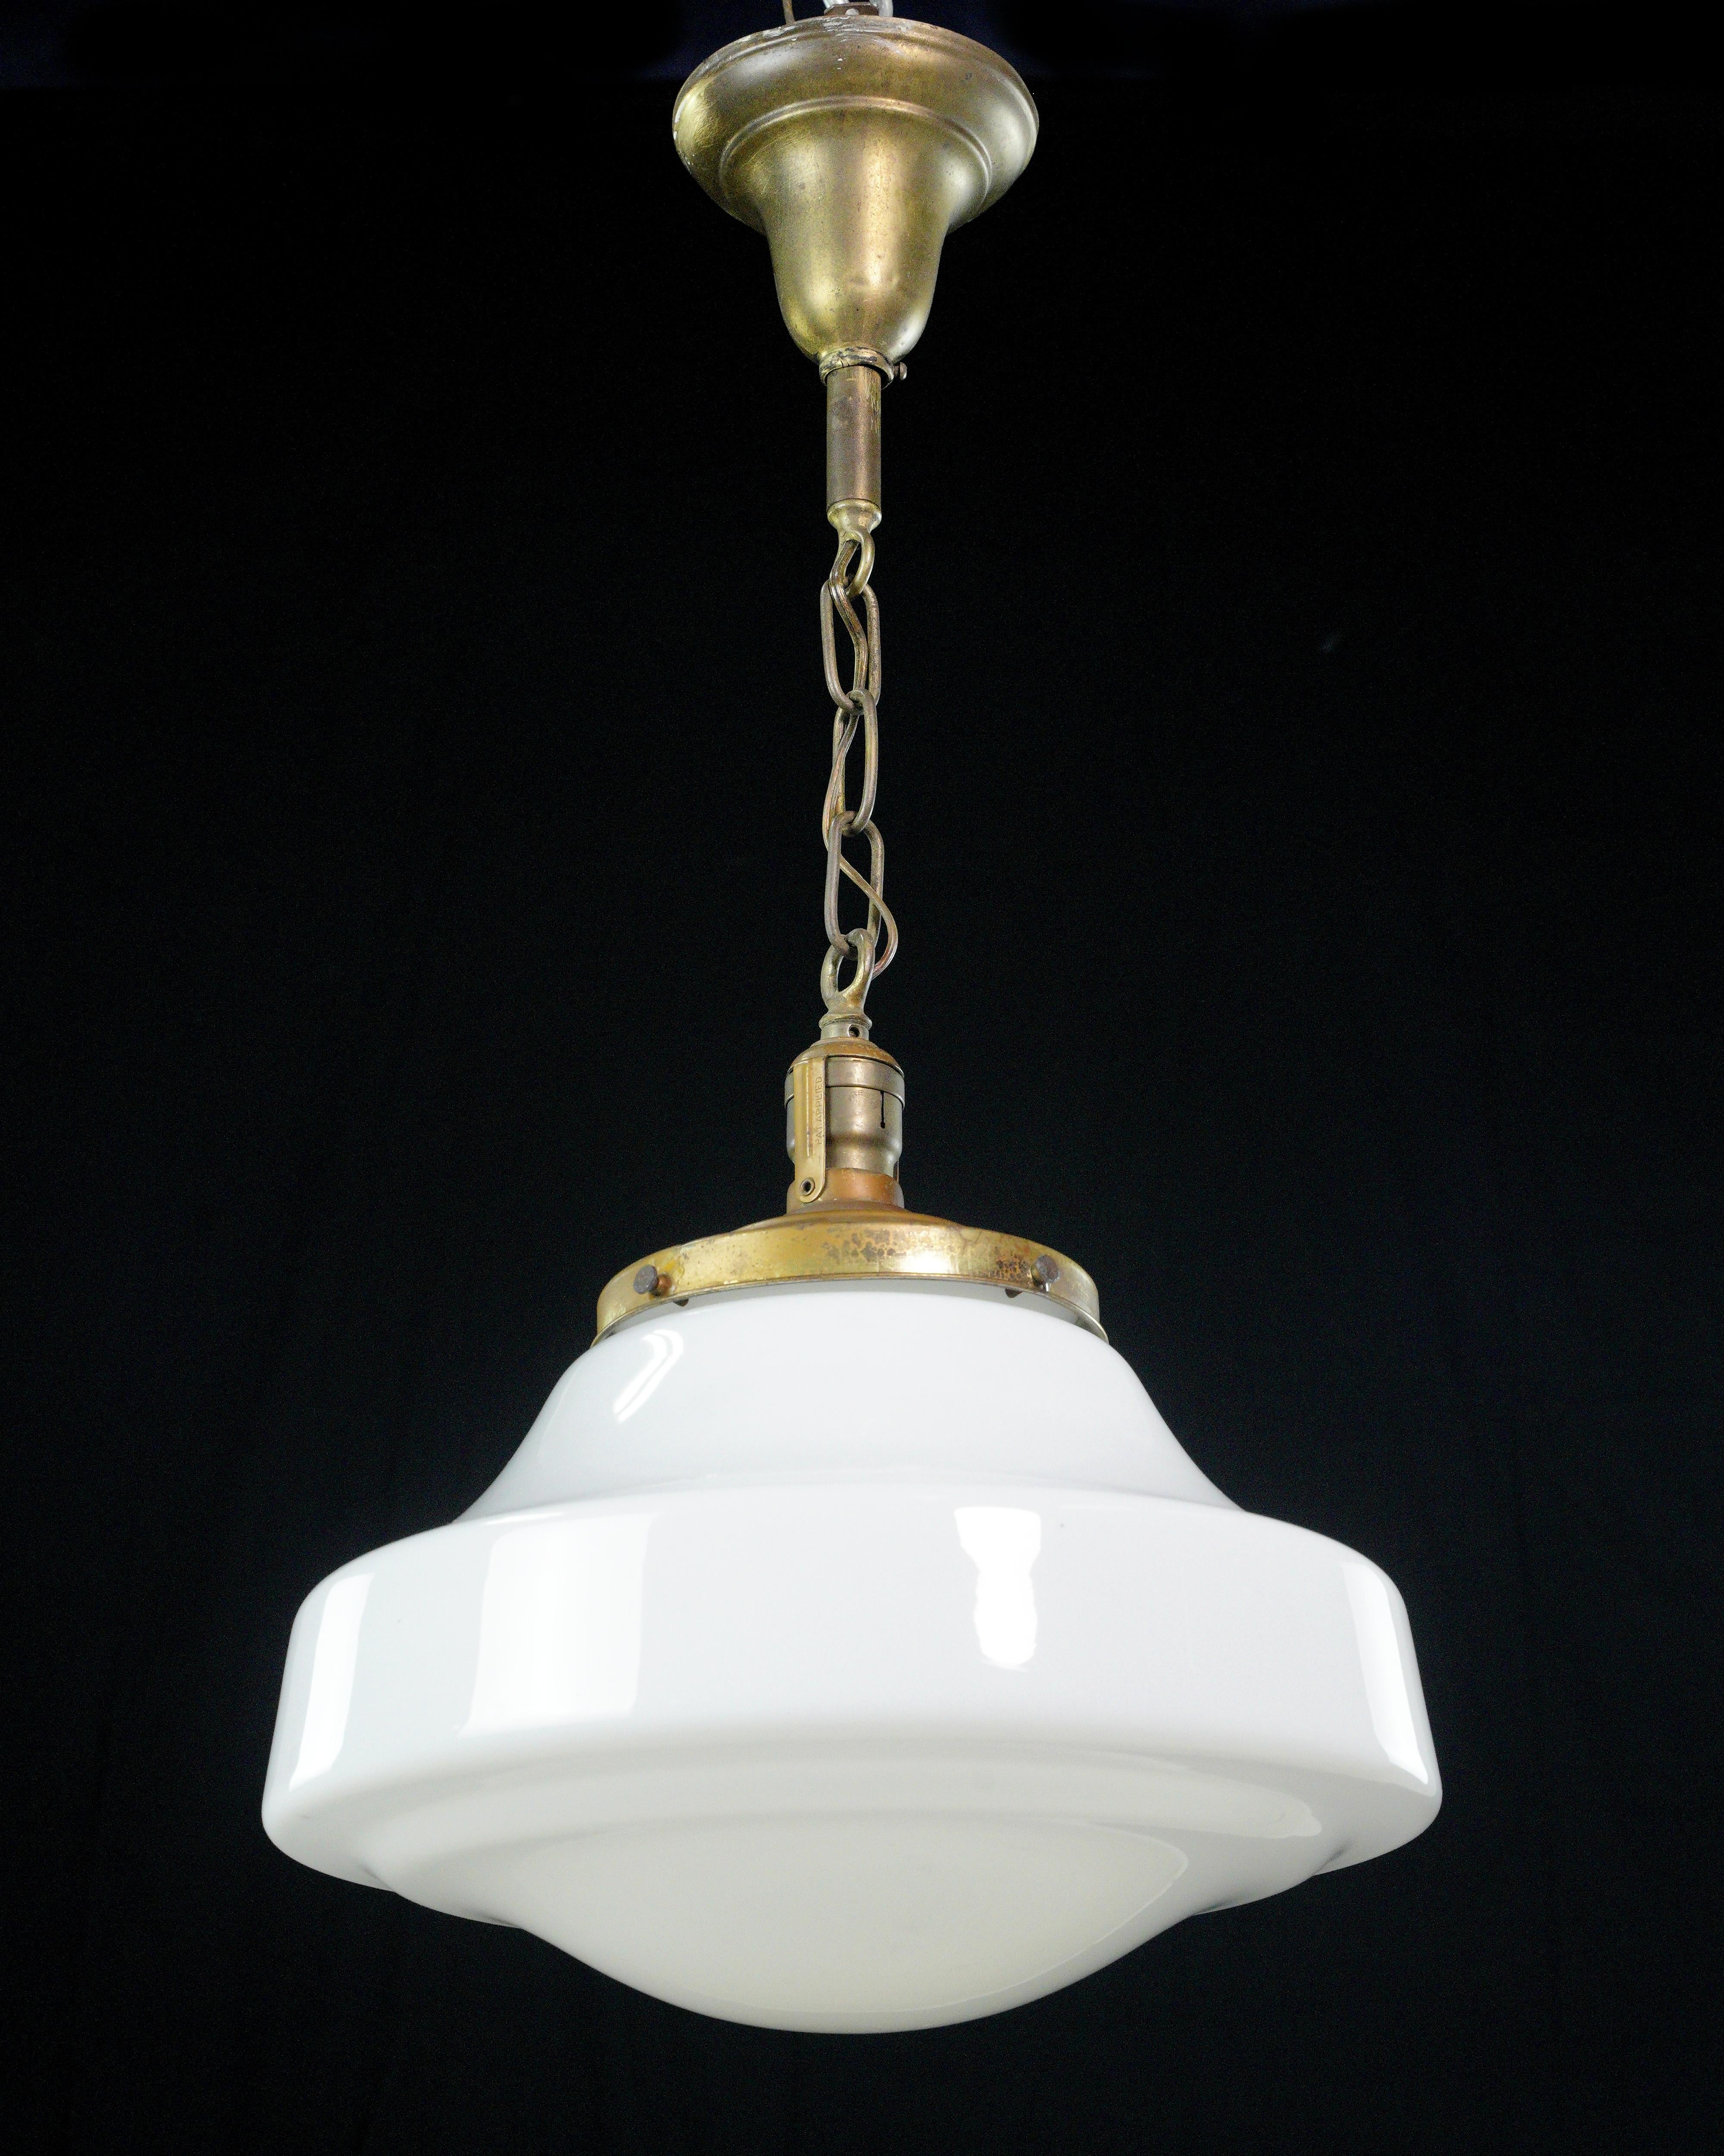 This antique pendant light is a stunning fixture with a schoolhouse inspired white milk glass globe and an elegant brass finish steel chain fitter. It combines timeless beauty with a touch of sophistication. This has one standard socket. The price